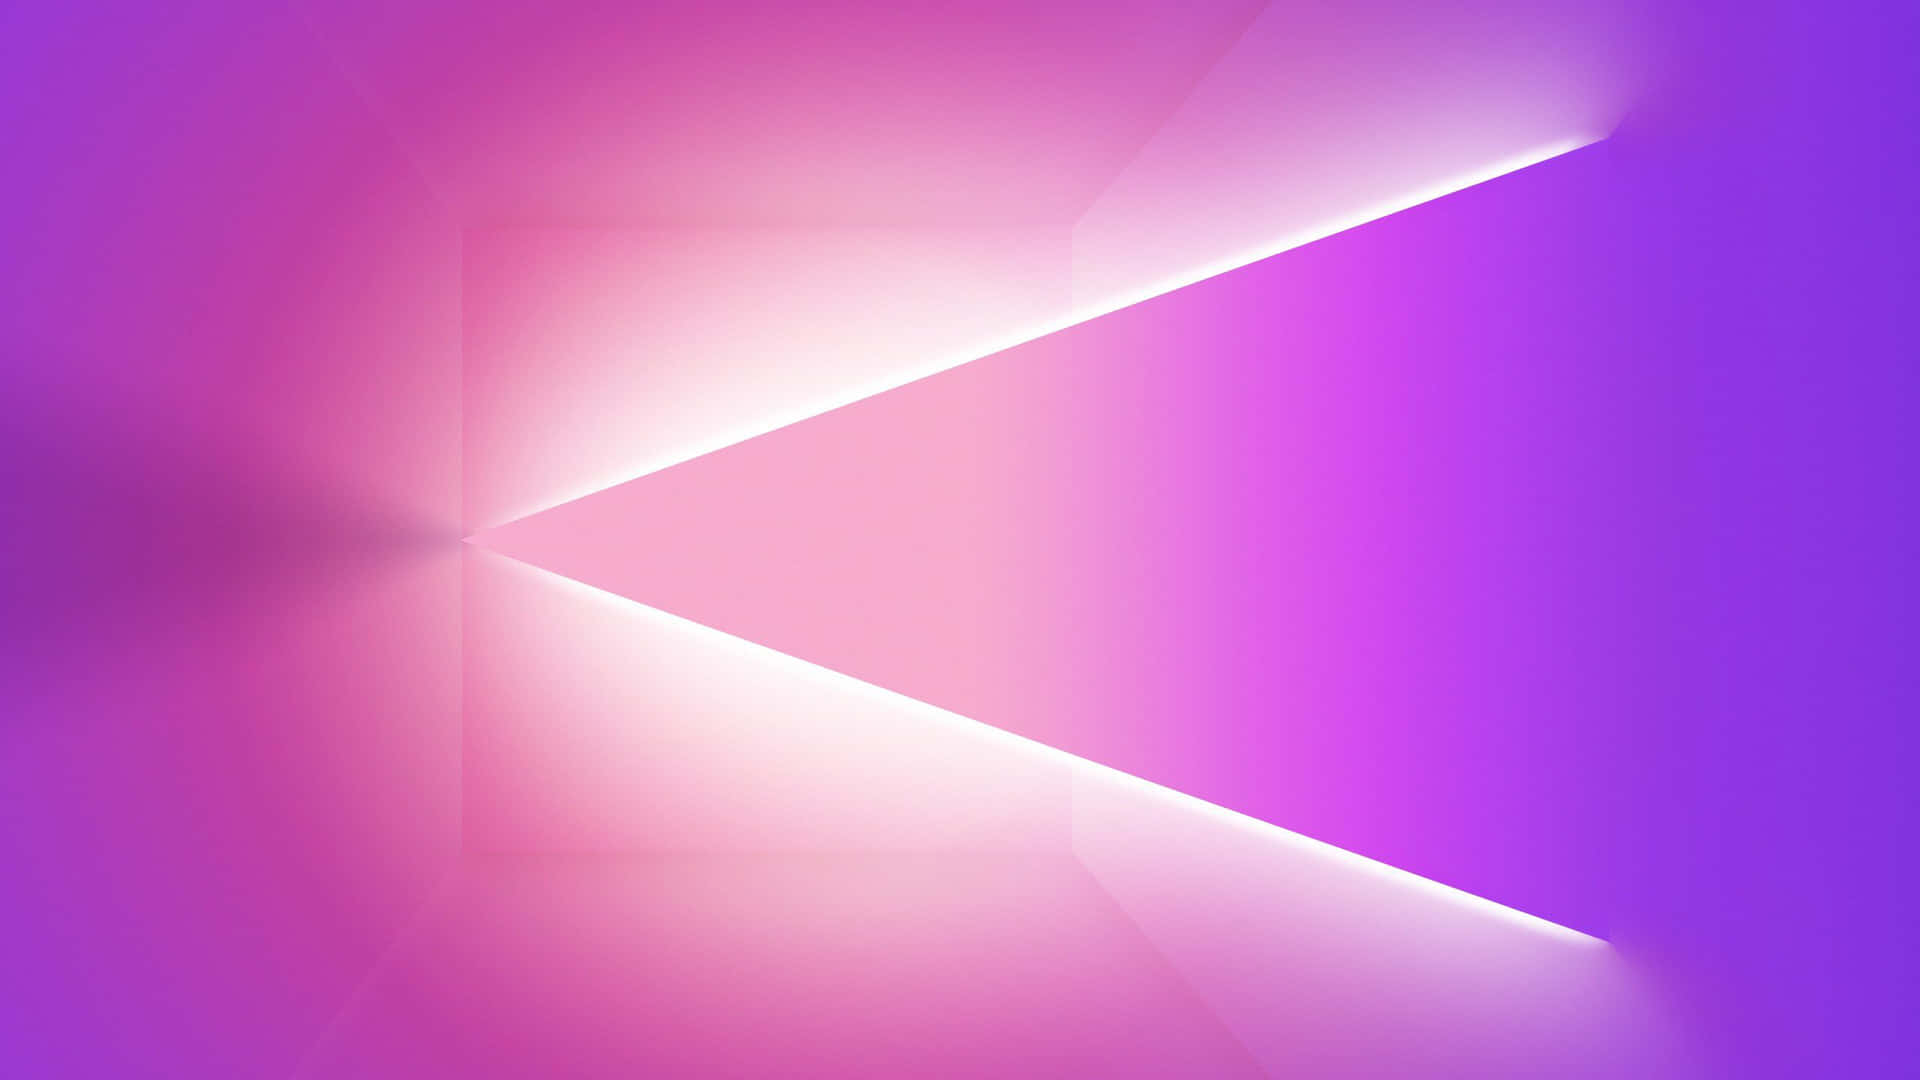 A mesmerizing triangle background full of vibrant colors